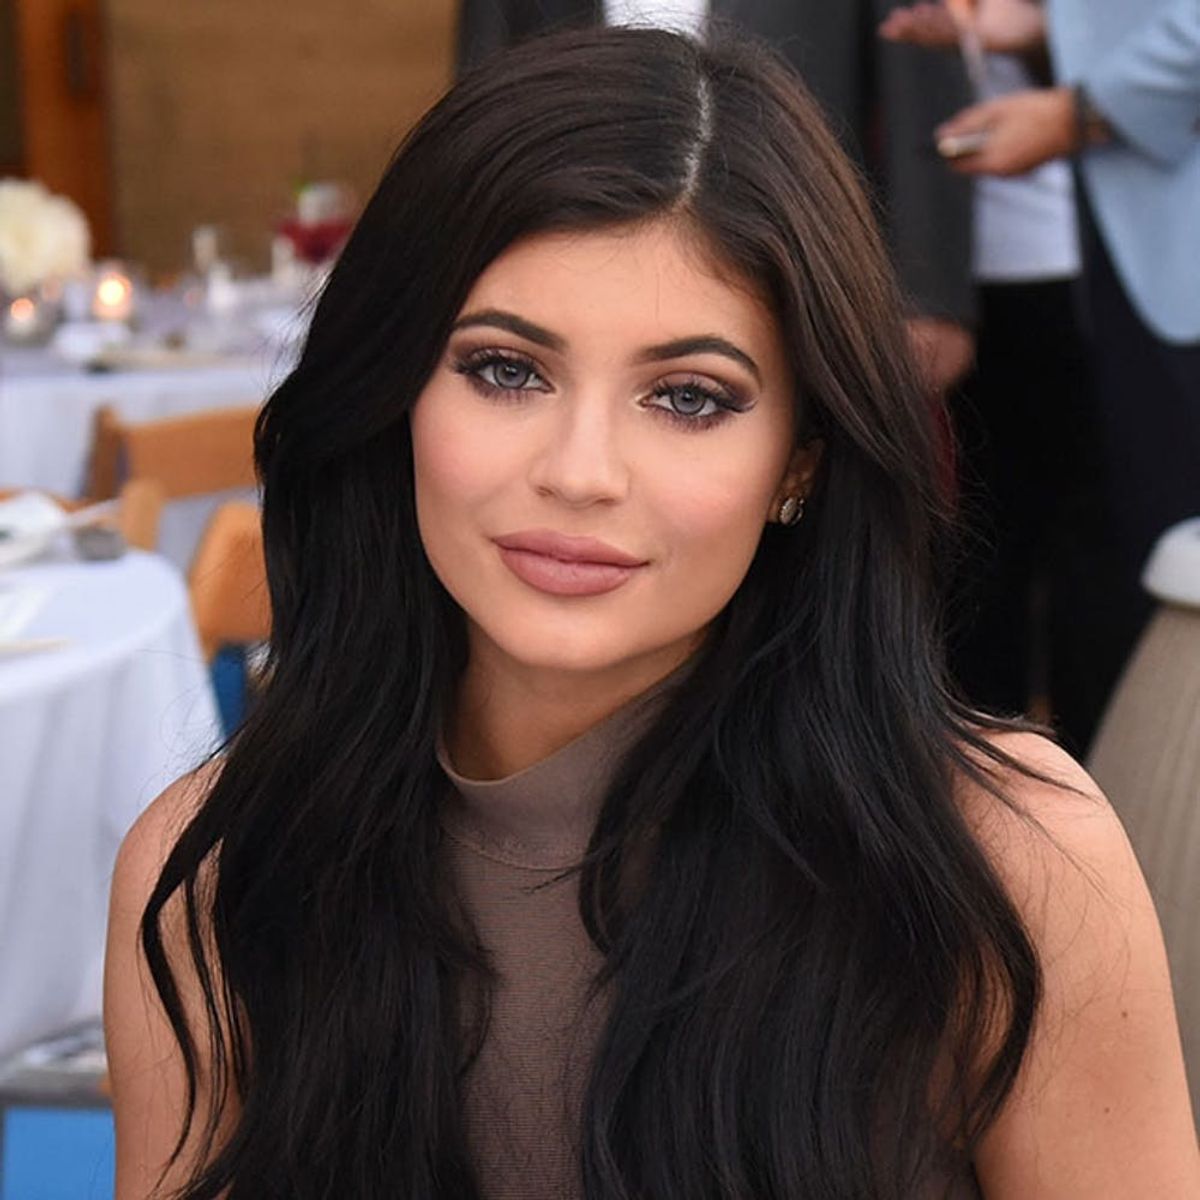 Kylie Jenner Just Posted Something Actually Inspiring on Instagram (No, Really)